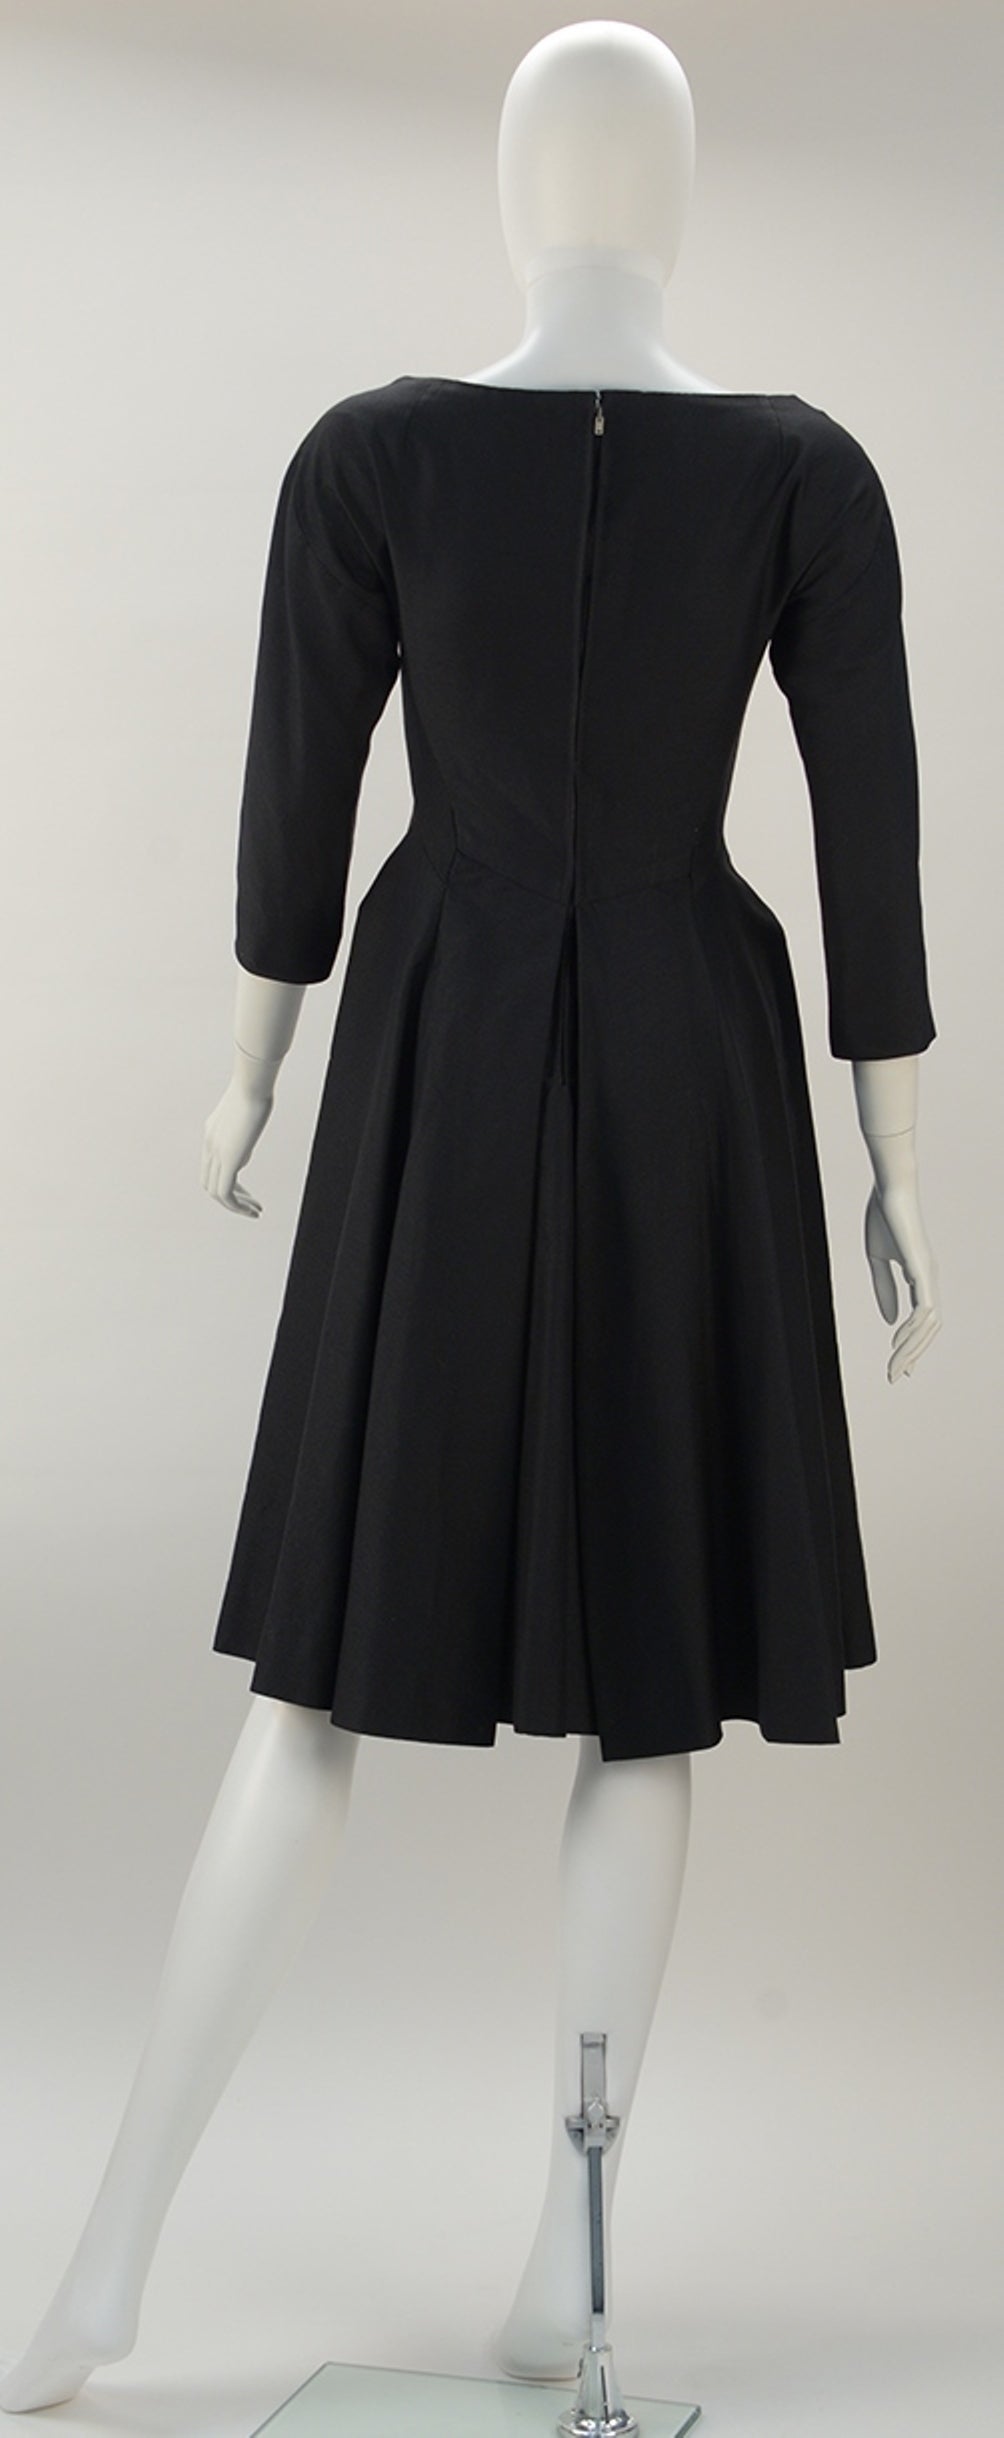 1950s Liberty of London Black Dress For Sale at 1stdibs